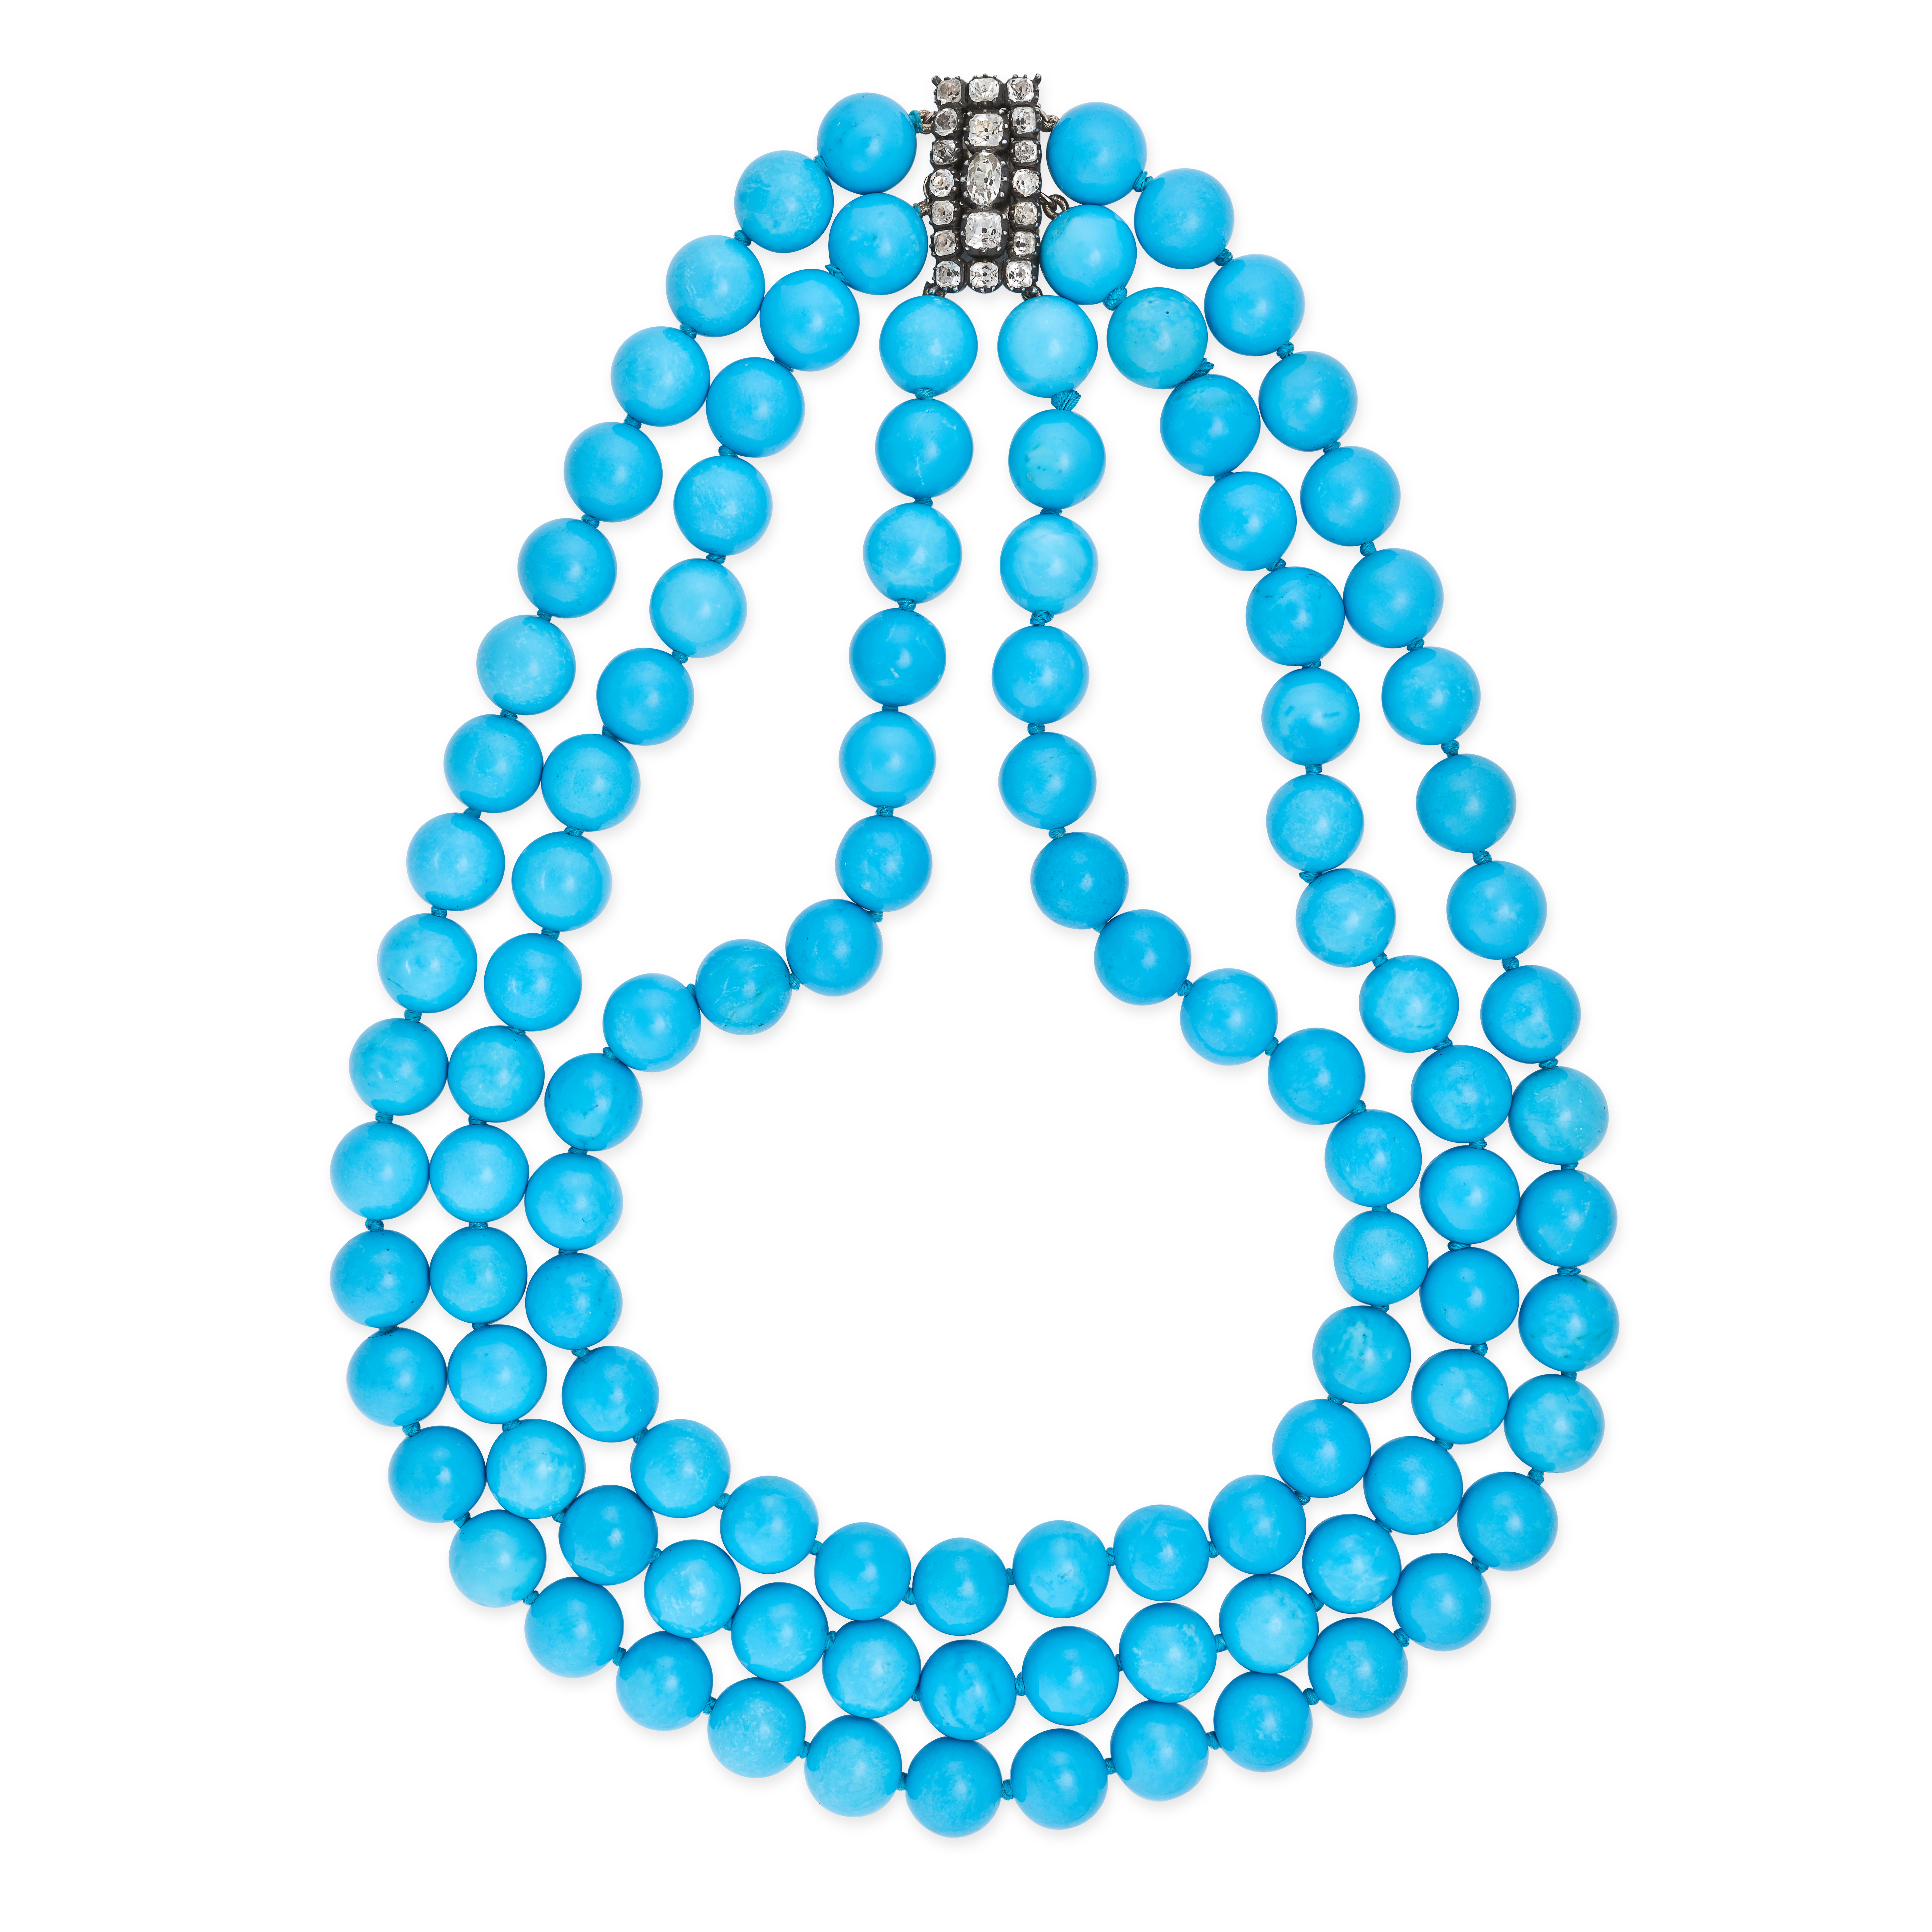 NO RESERVE - A HOWLITE BEAD AND PASTE NECKLACE comprising three rows of polished howlite beads, t...